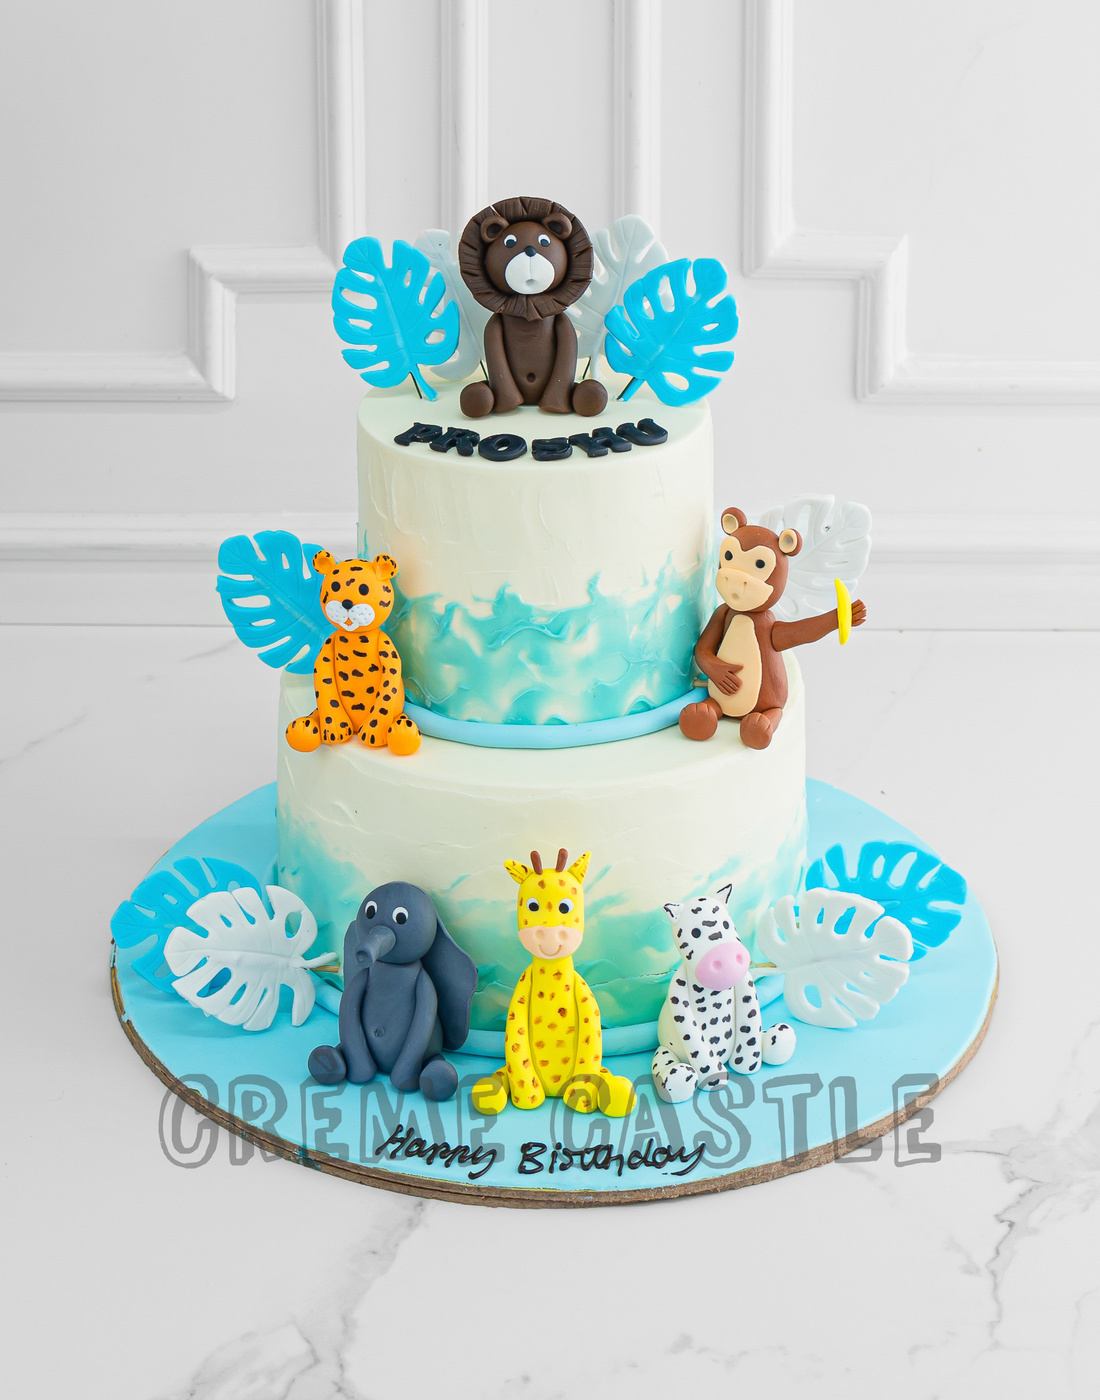 A Jungle Safari Cake With A Surprise Inside - Sweet Dreams and Sugar Highs